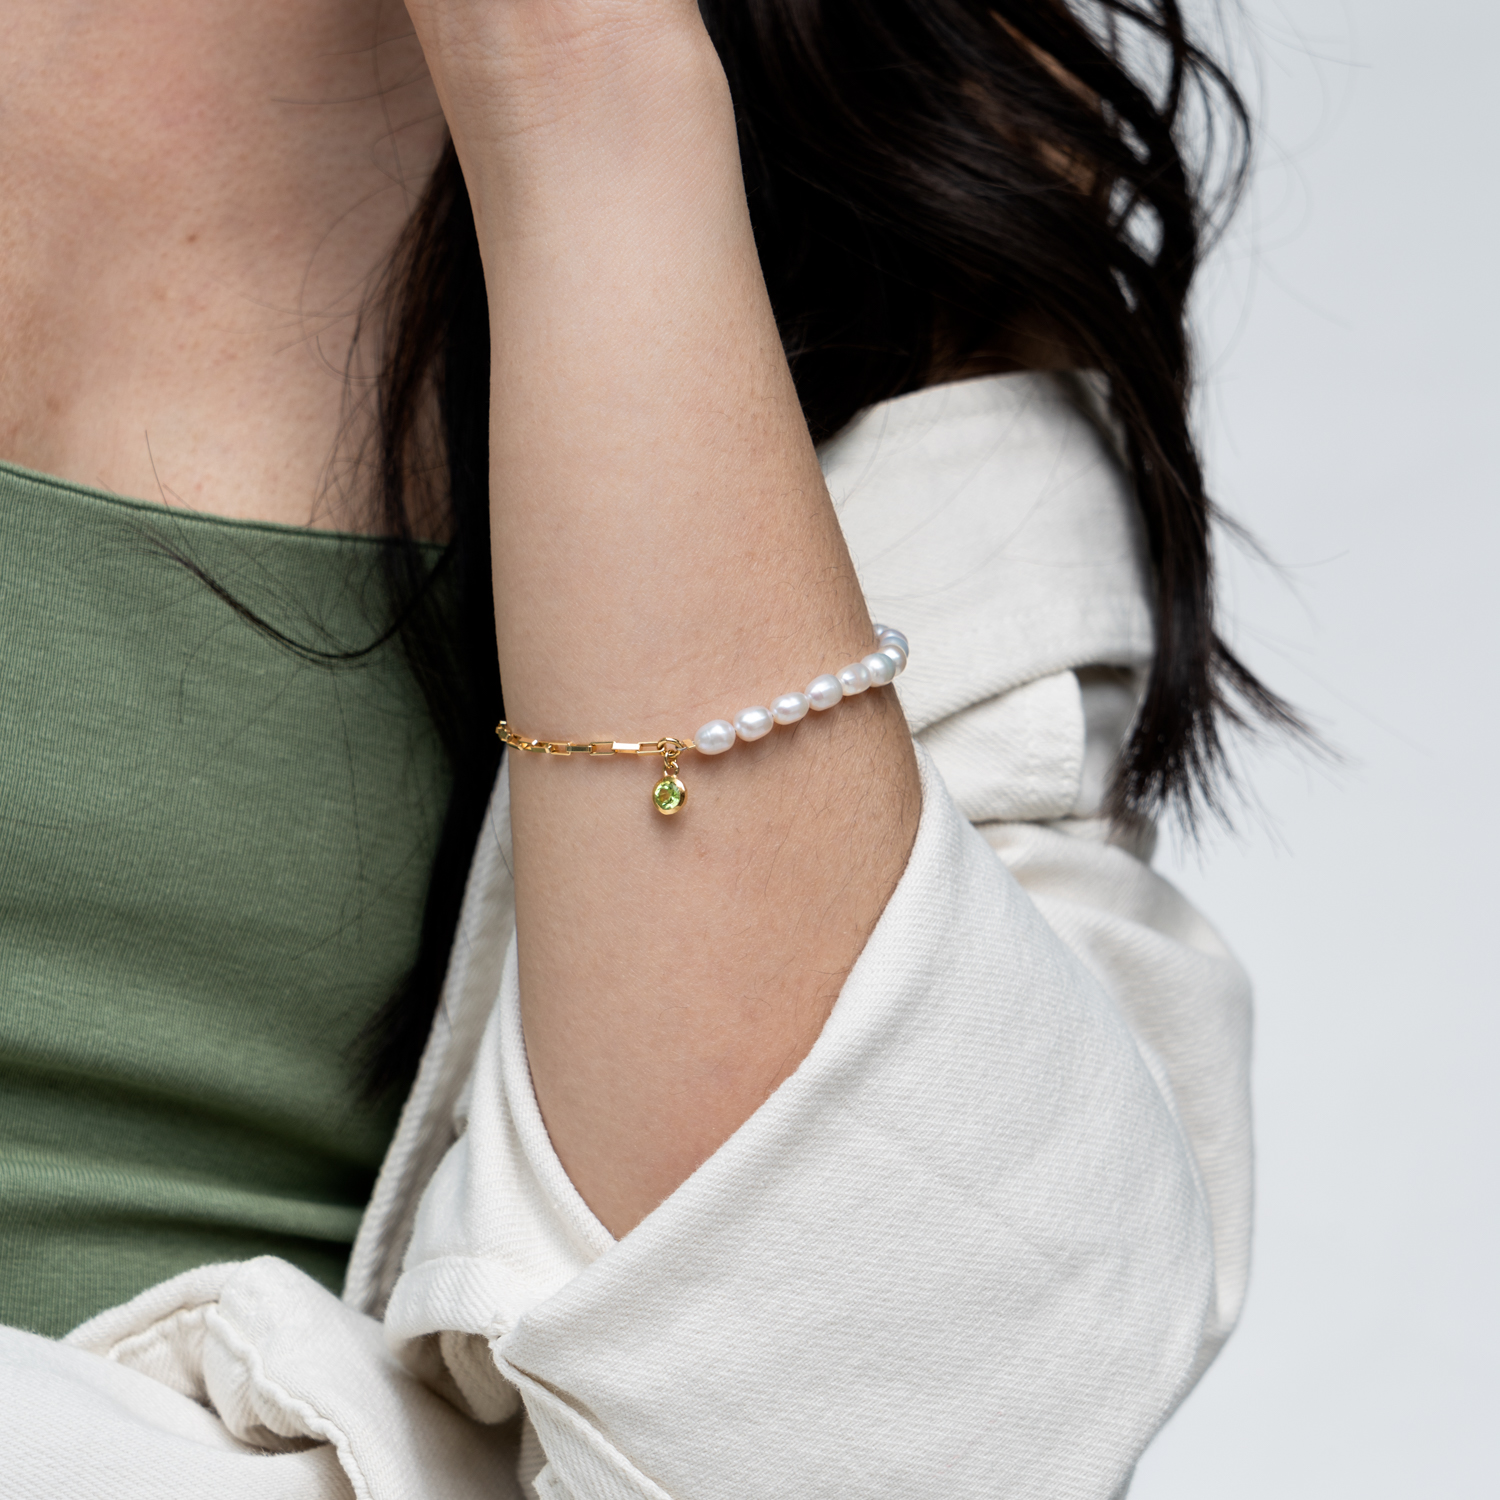 Dower-and-Hall-Yellow-Gold-Vermeil-Luna-White-Pearl-Chain-and-Peridot-Drop-Bracelet